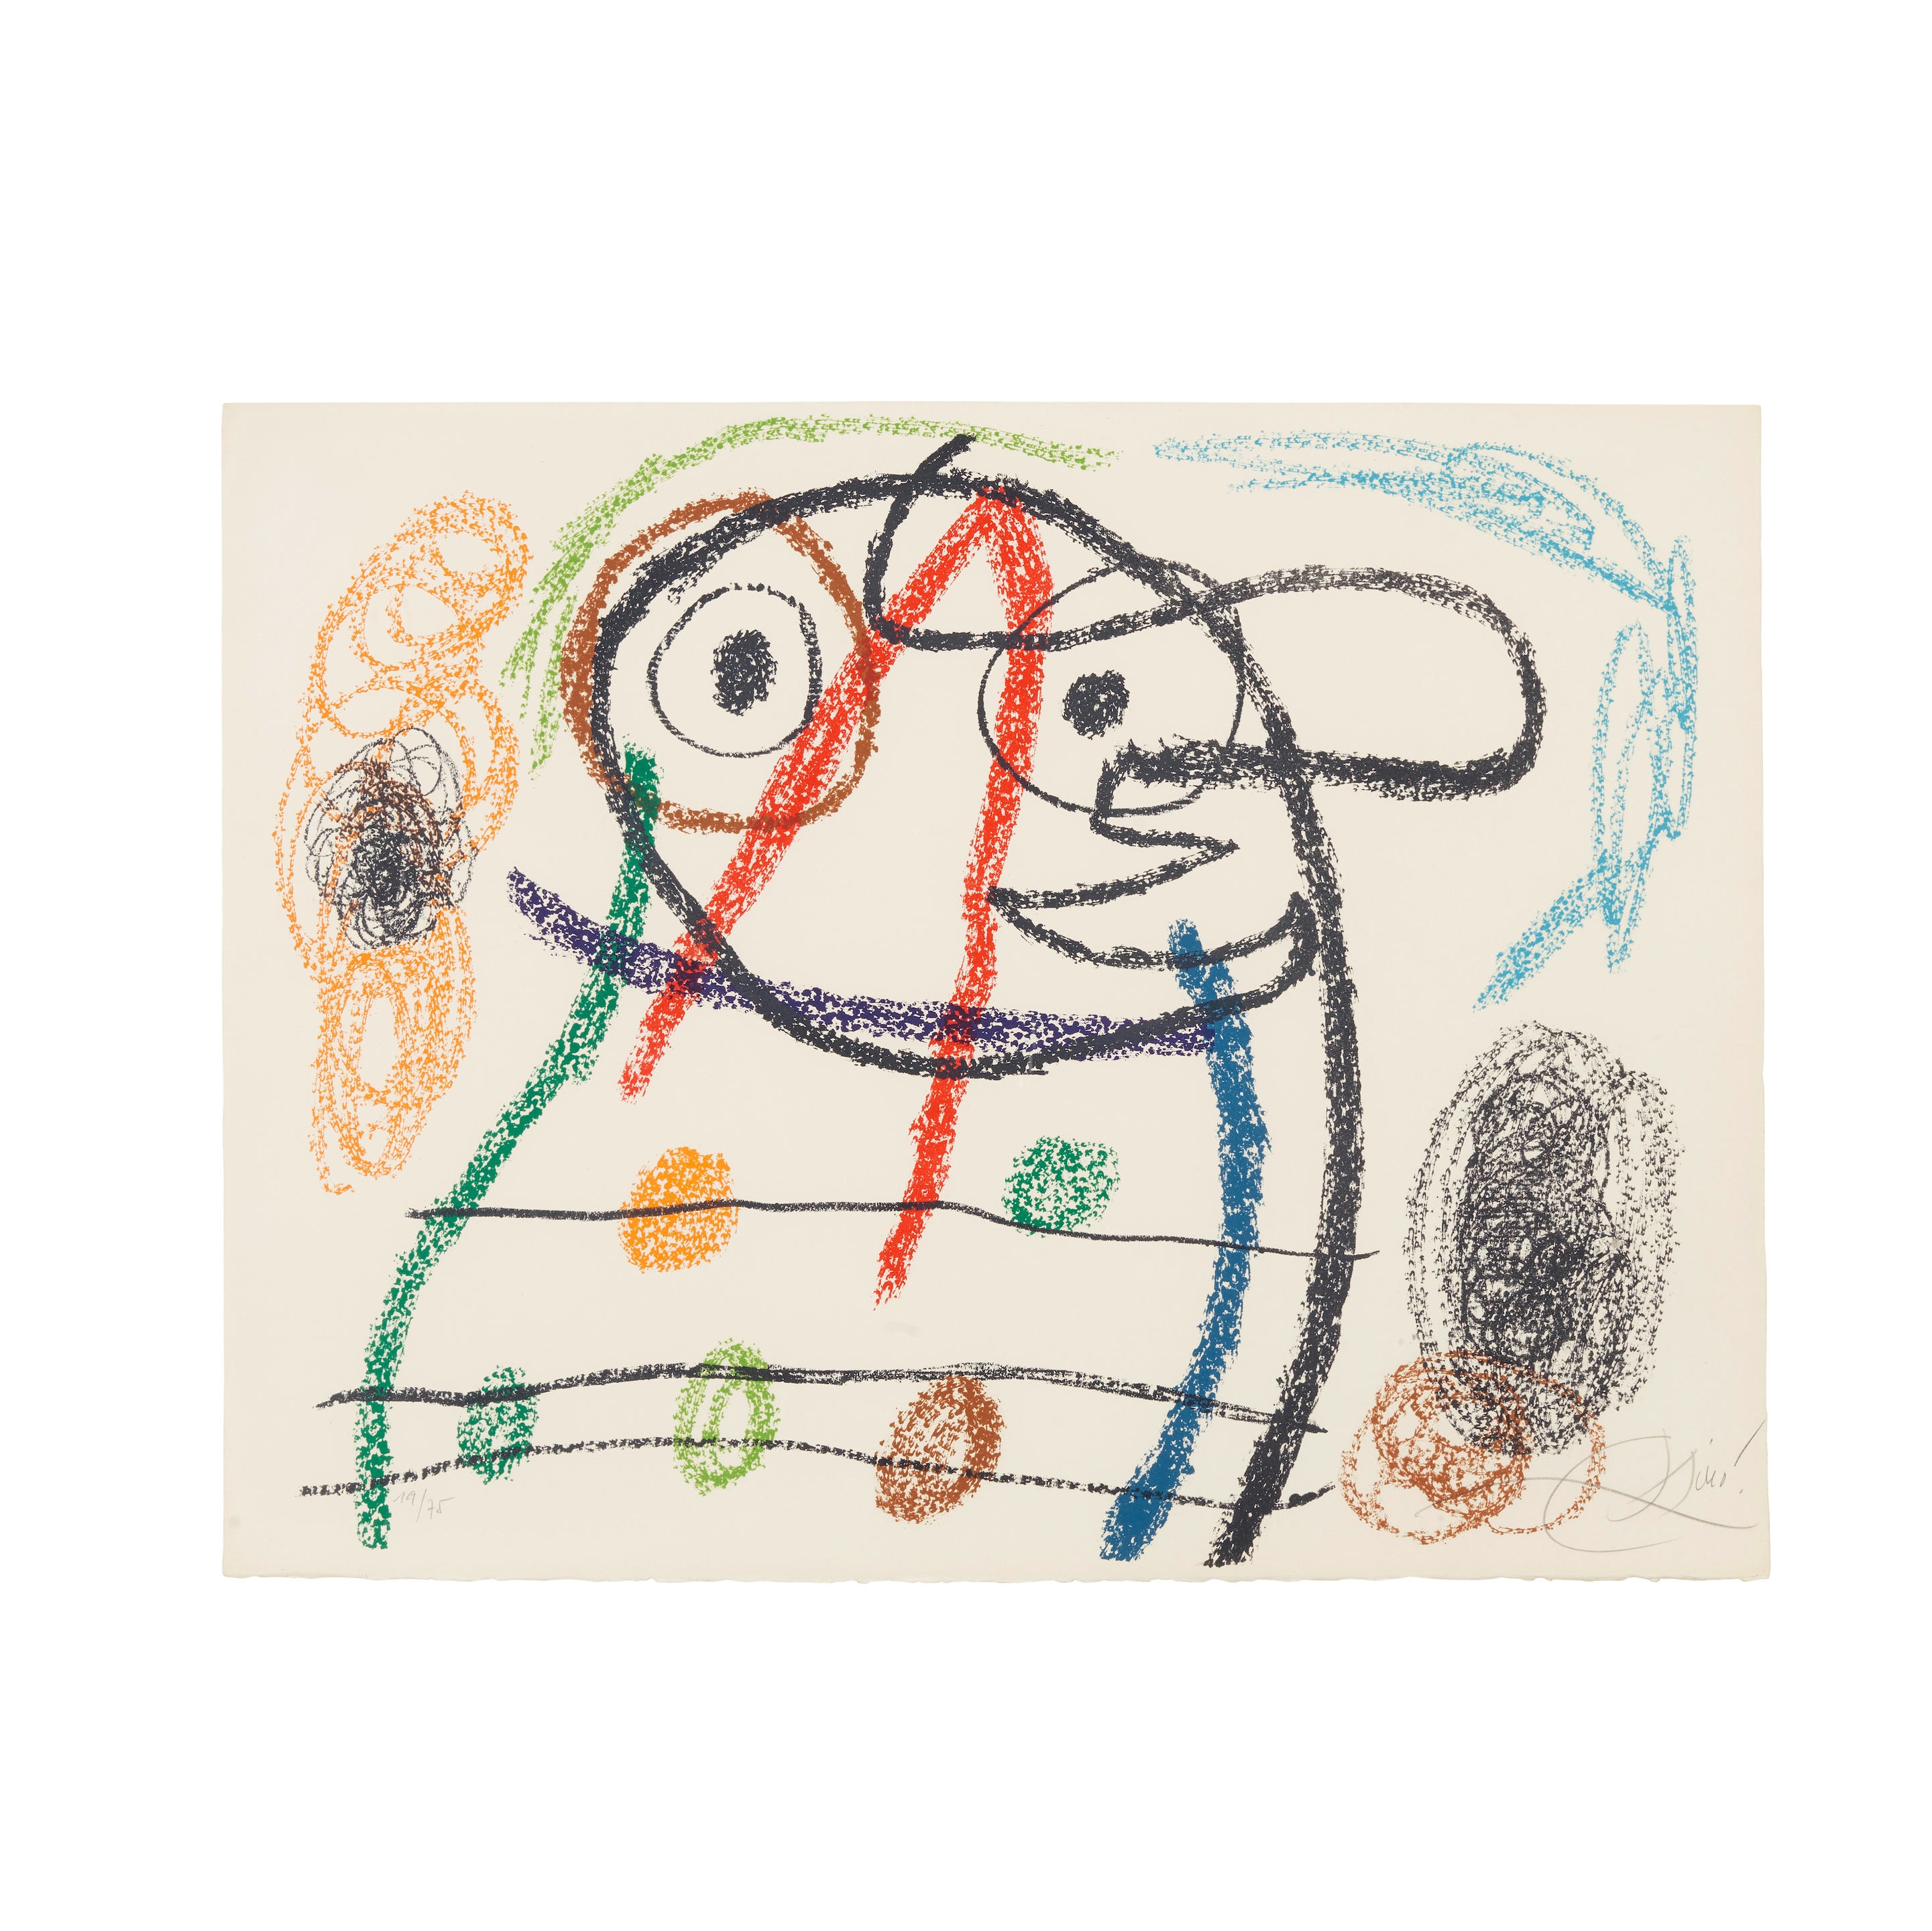 One Plate, from Album 21 by Joan Miró, 1978